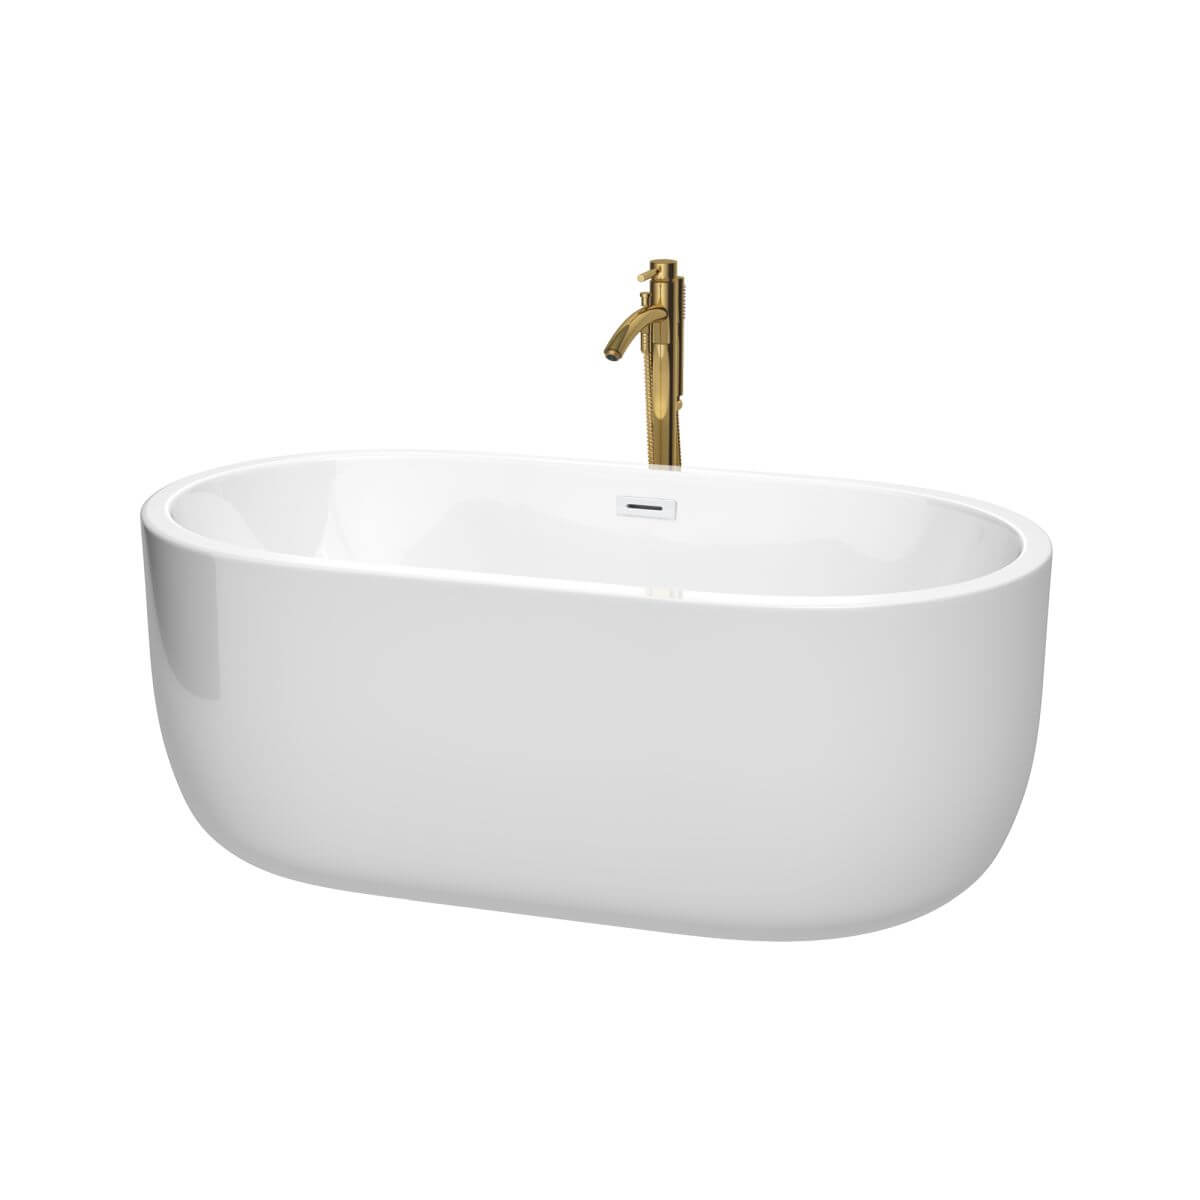 Wyndham Collection Juliette 60 inch Freestanding Bathtub in White with Shiny White Trim and Floor Mounted Faucet in Brushed Gold - WCOBT101360SWATPGD